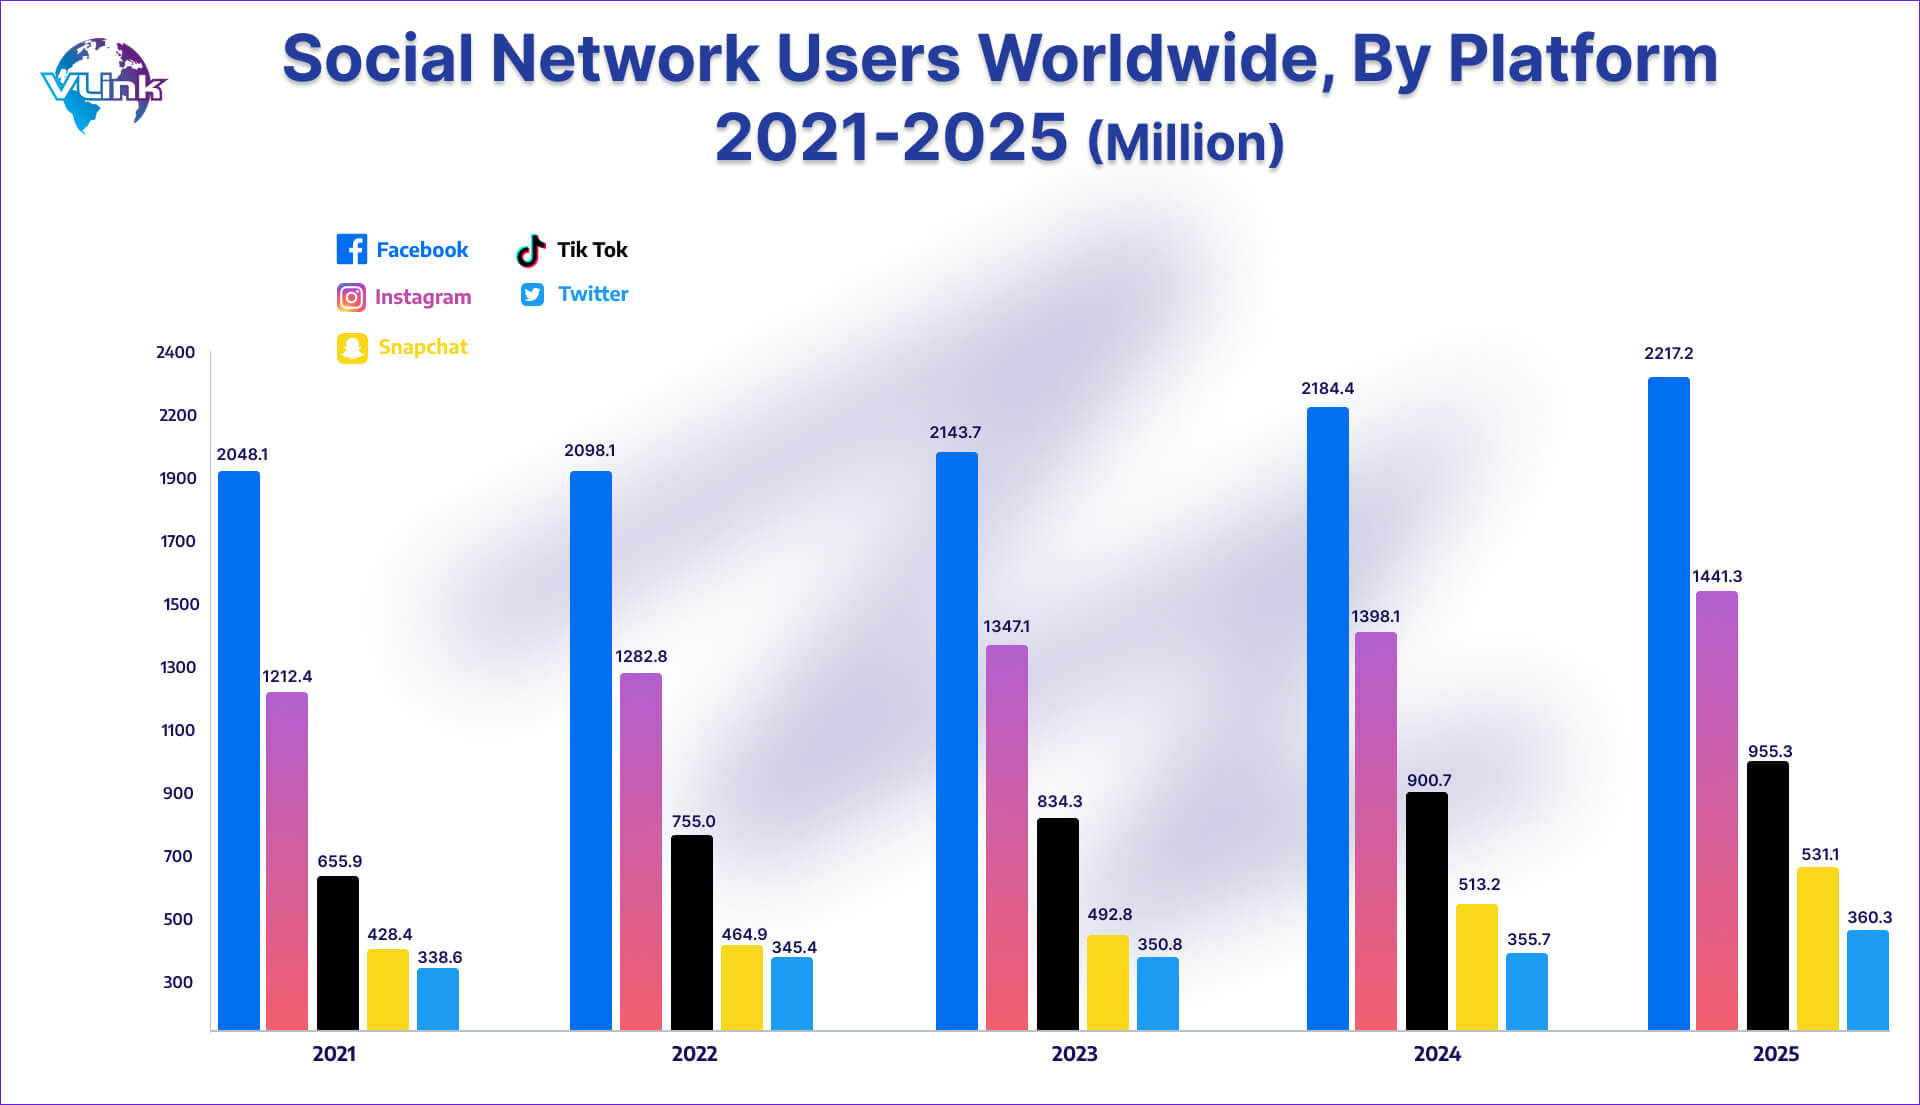 Social network users worldwide by platfrom